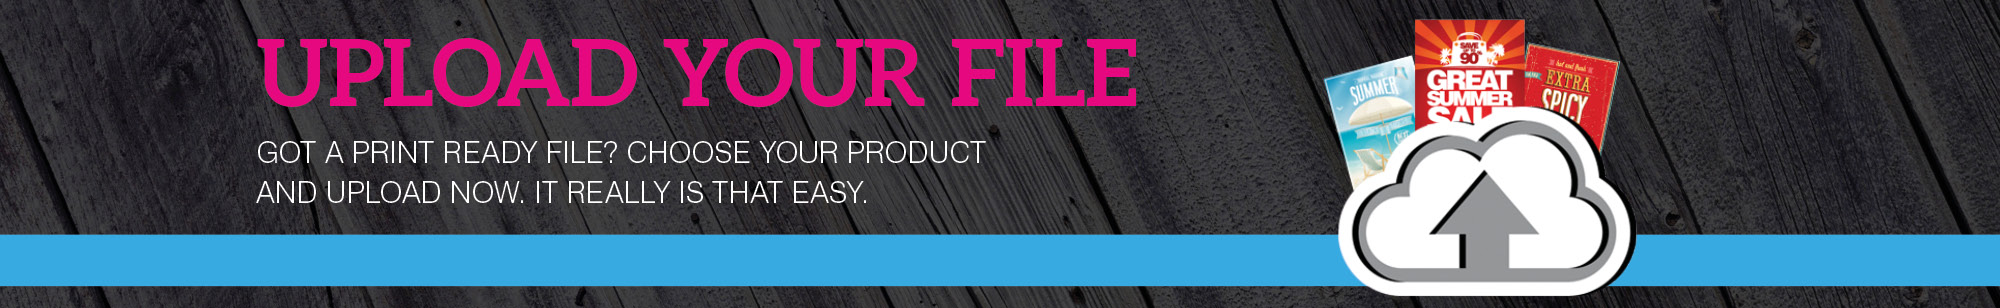 Print Your File